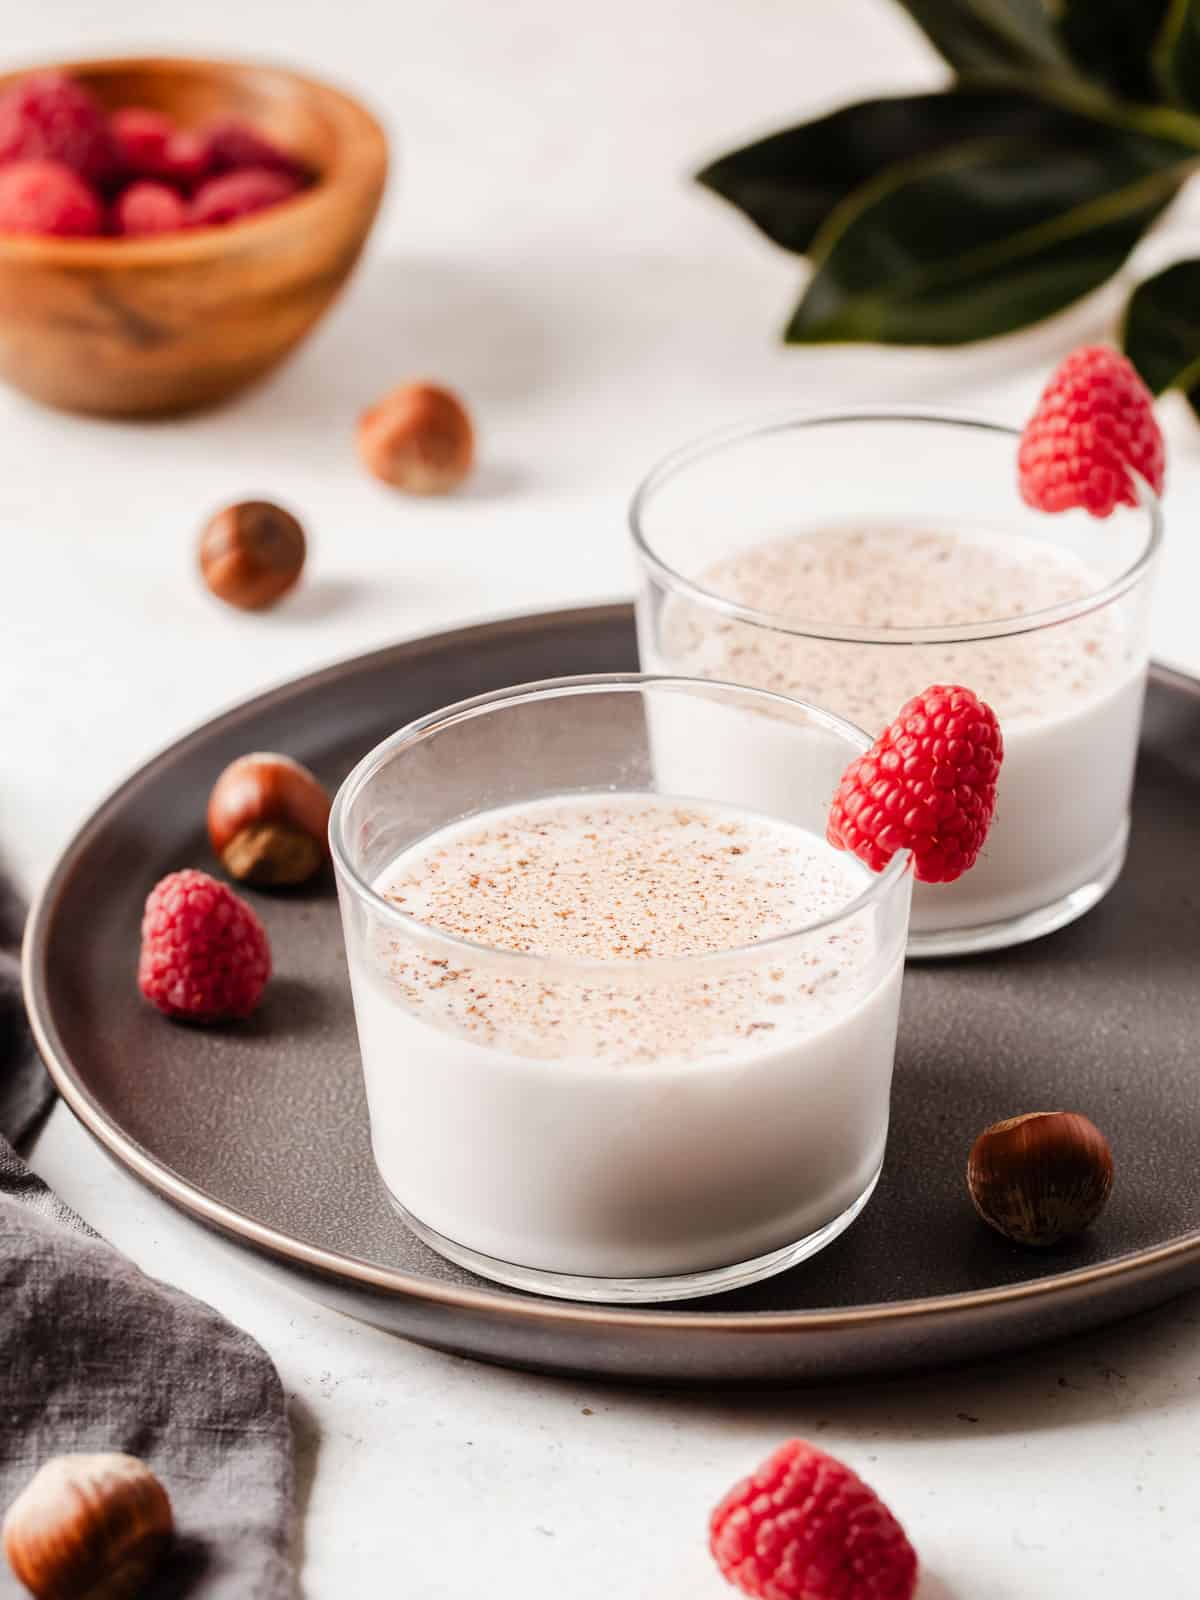 two shore glasses with creamy drink garnishes with raspberries.